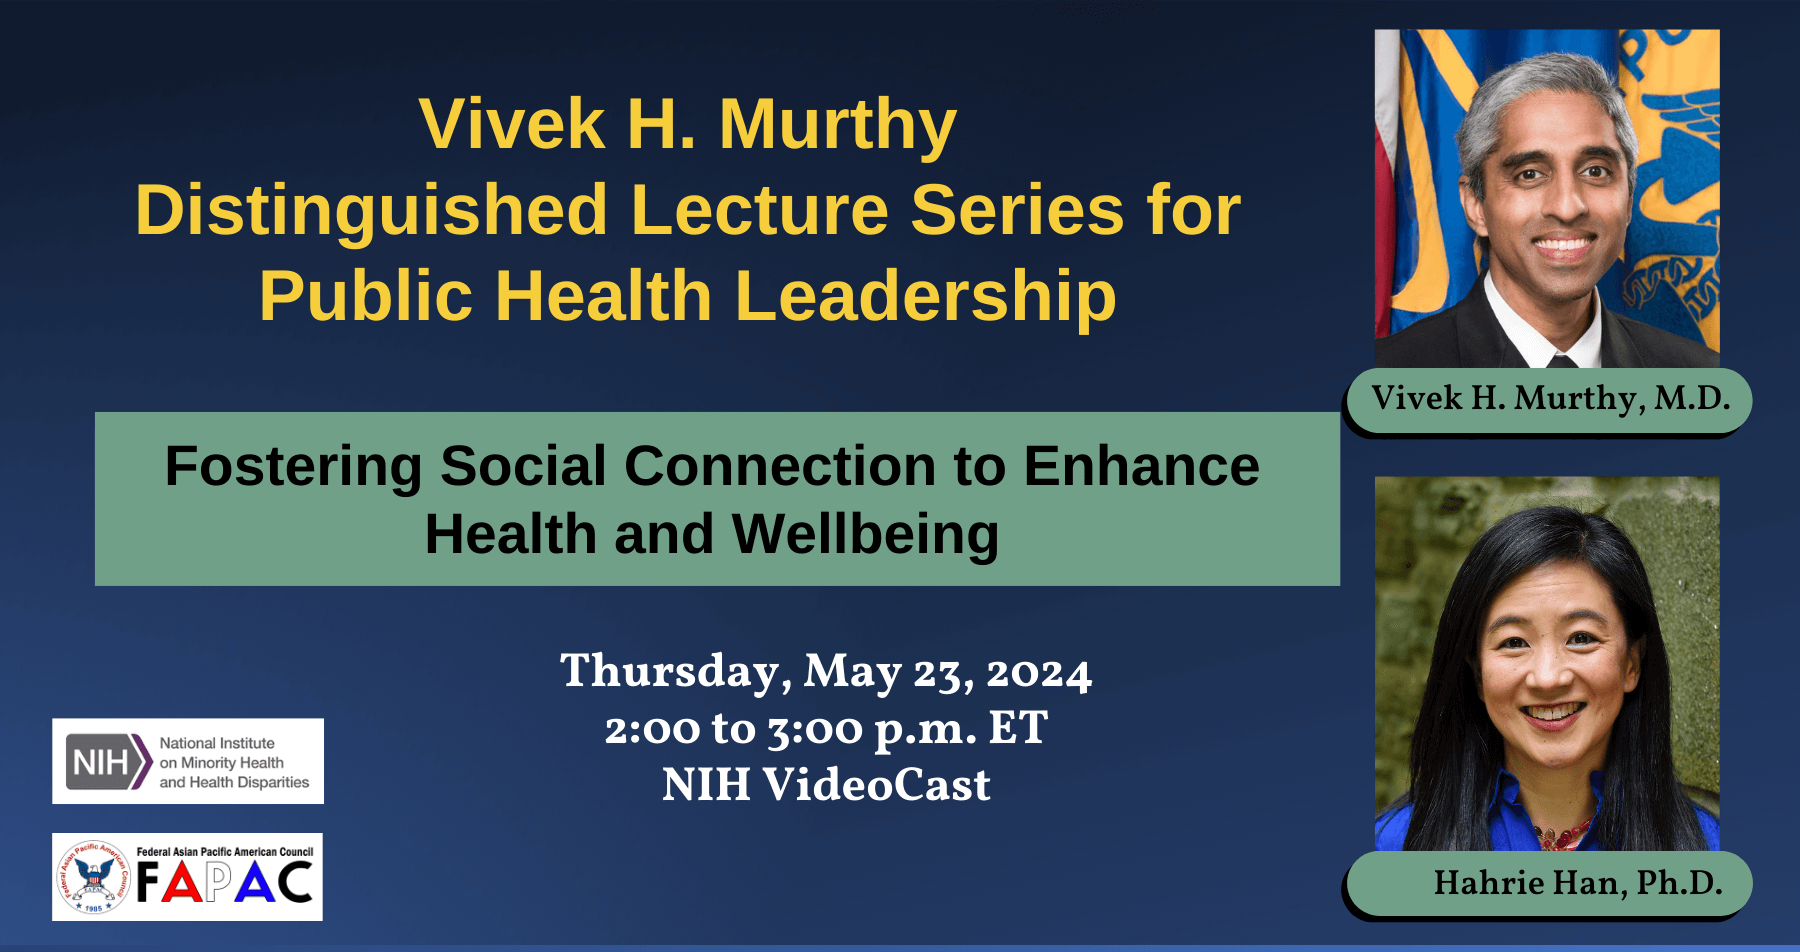 Vivek H. Murthy Distinguished Lecture Series for Public Health Leadership 2024: Photos of Surgeon General Vivek Murthy and Dr. Hahrie Han